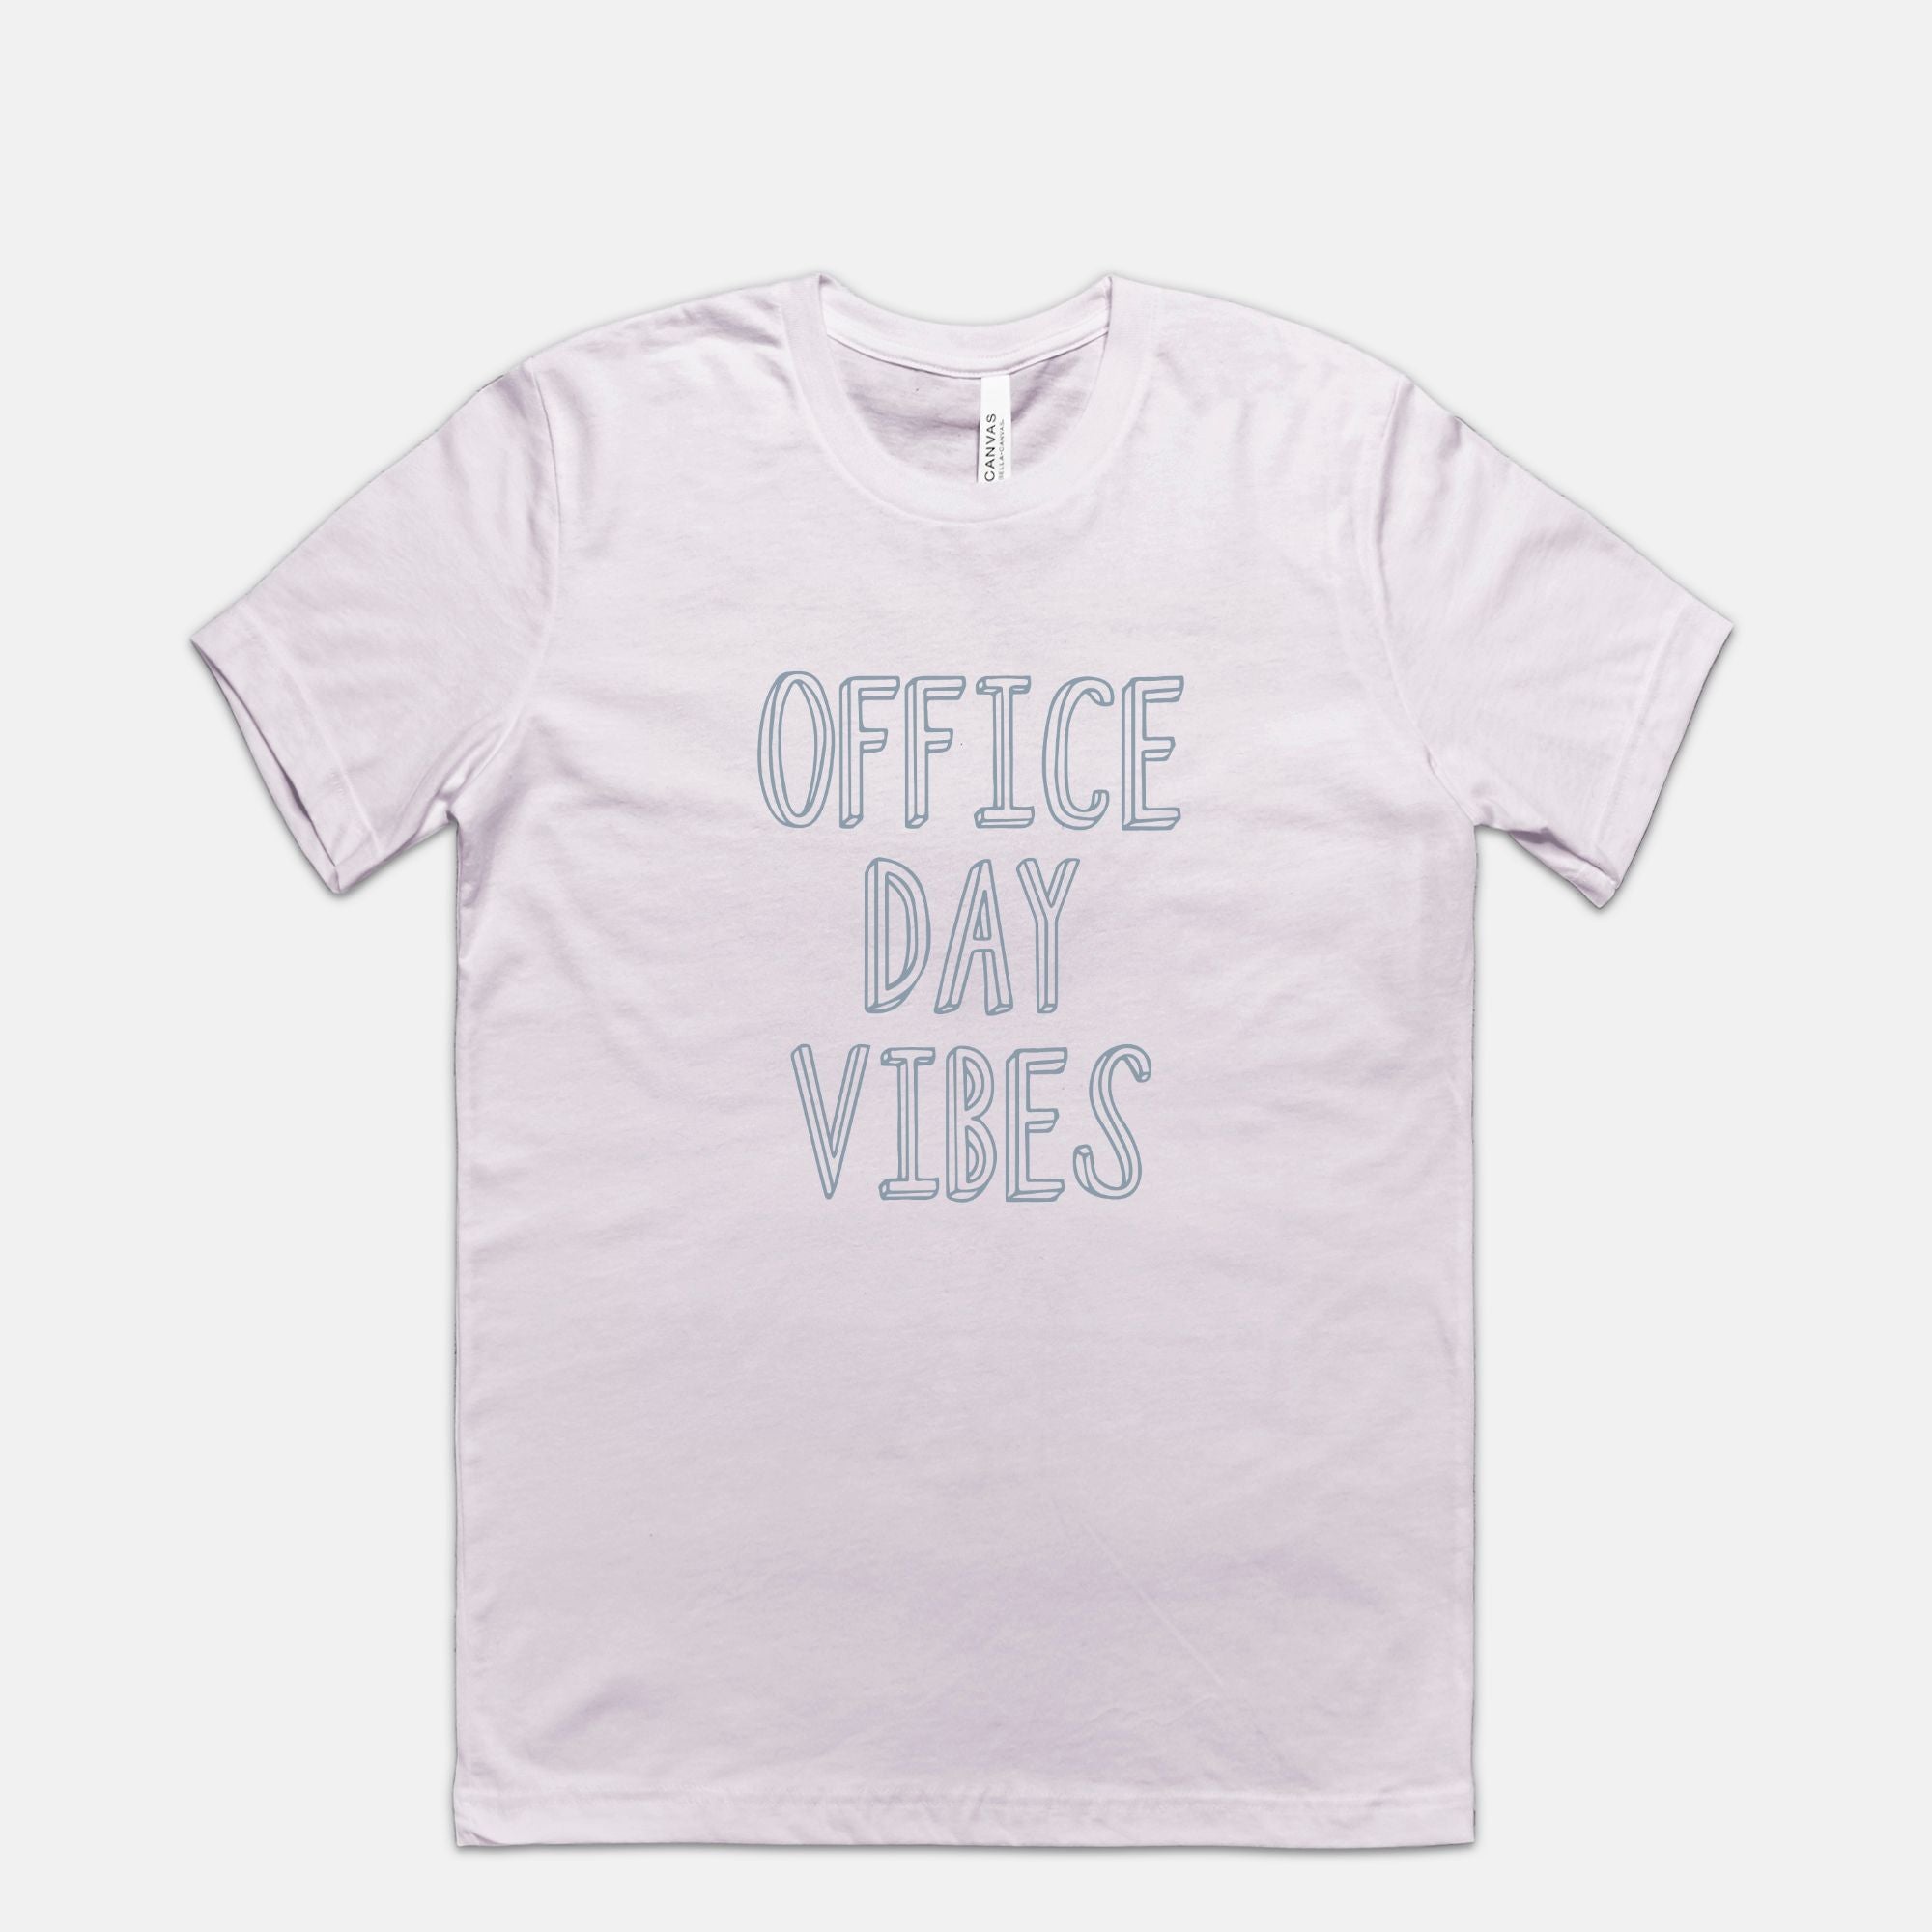 Office Day Vibes Tee (Black, Lavender Dust, White)